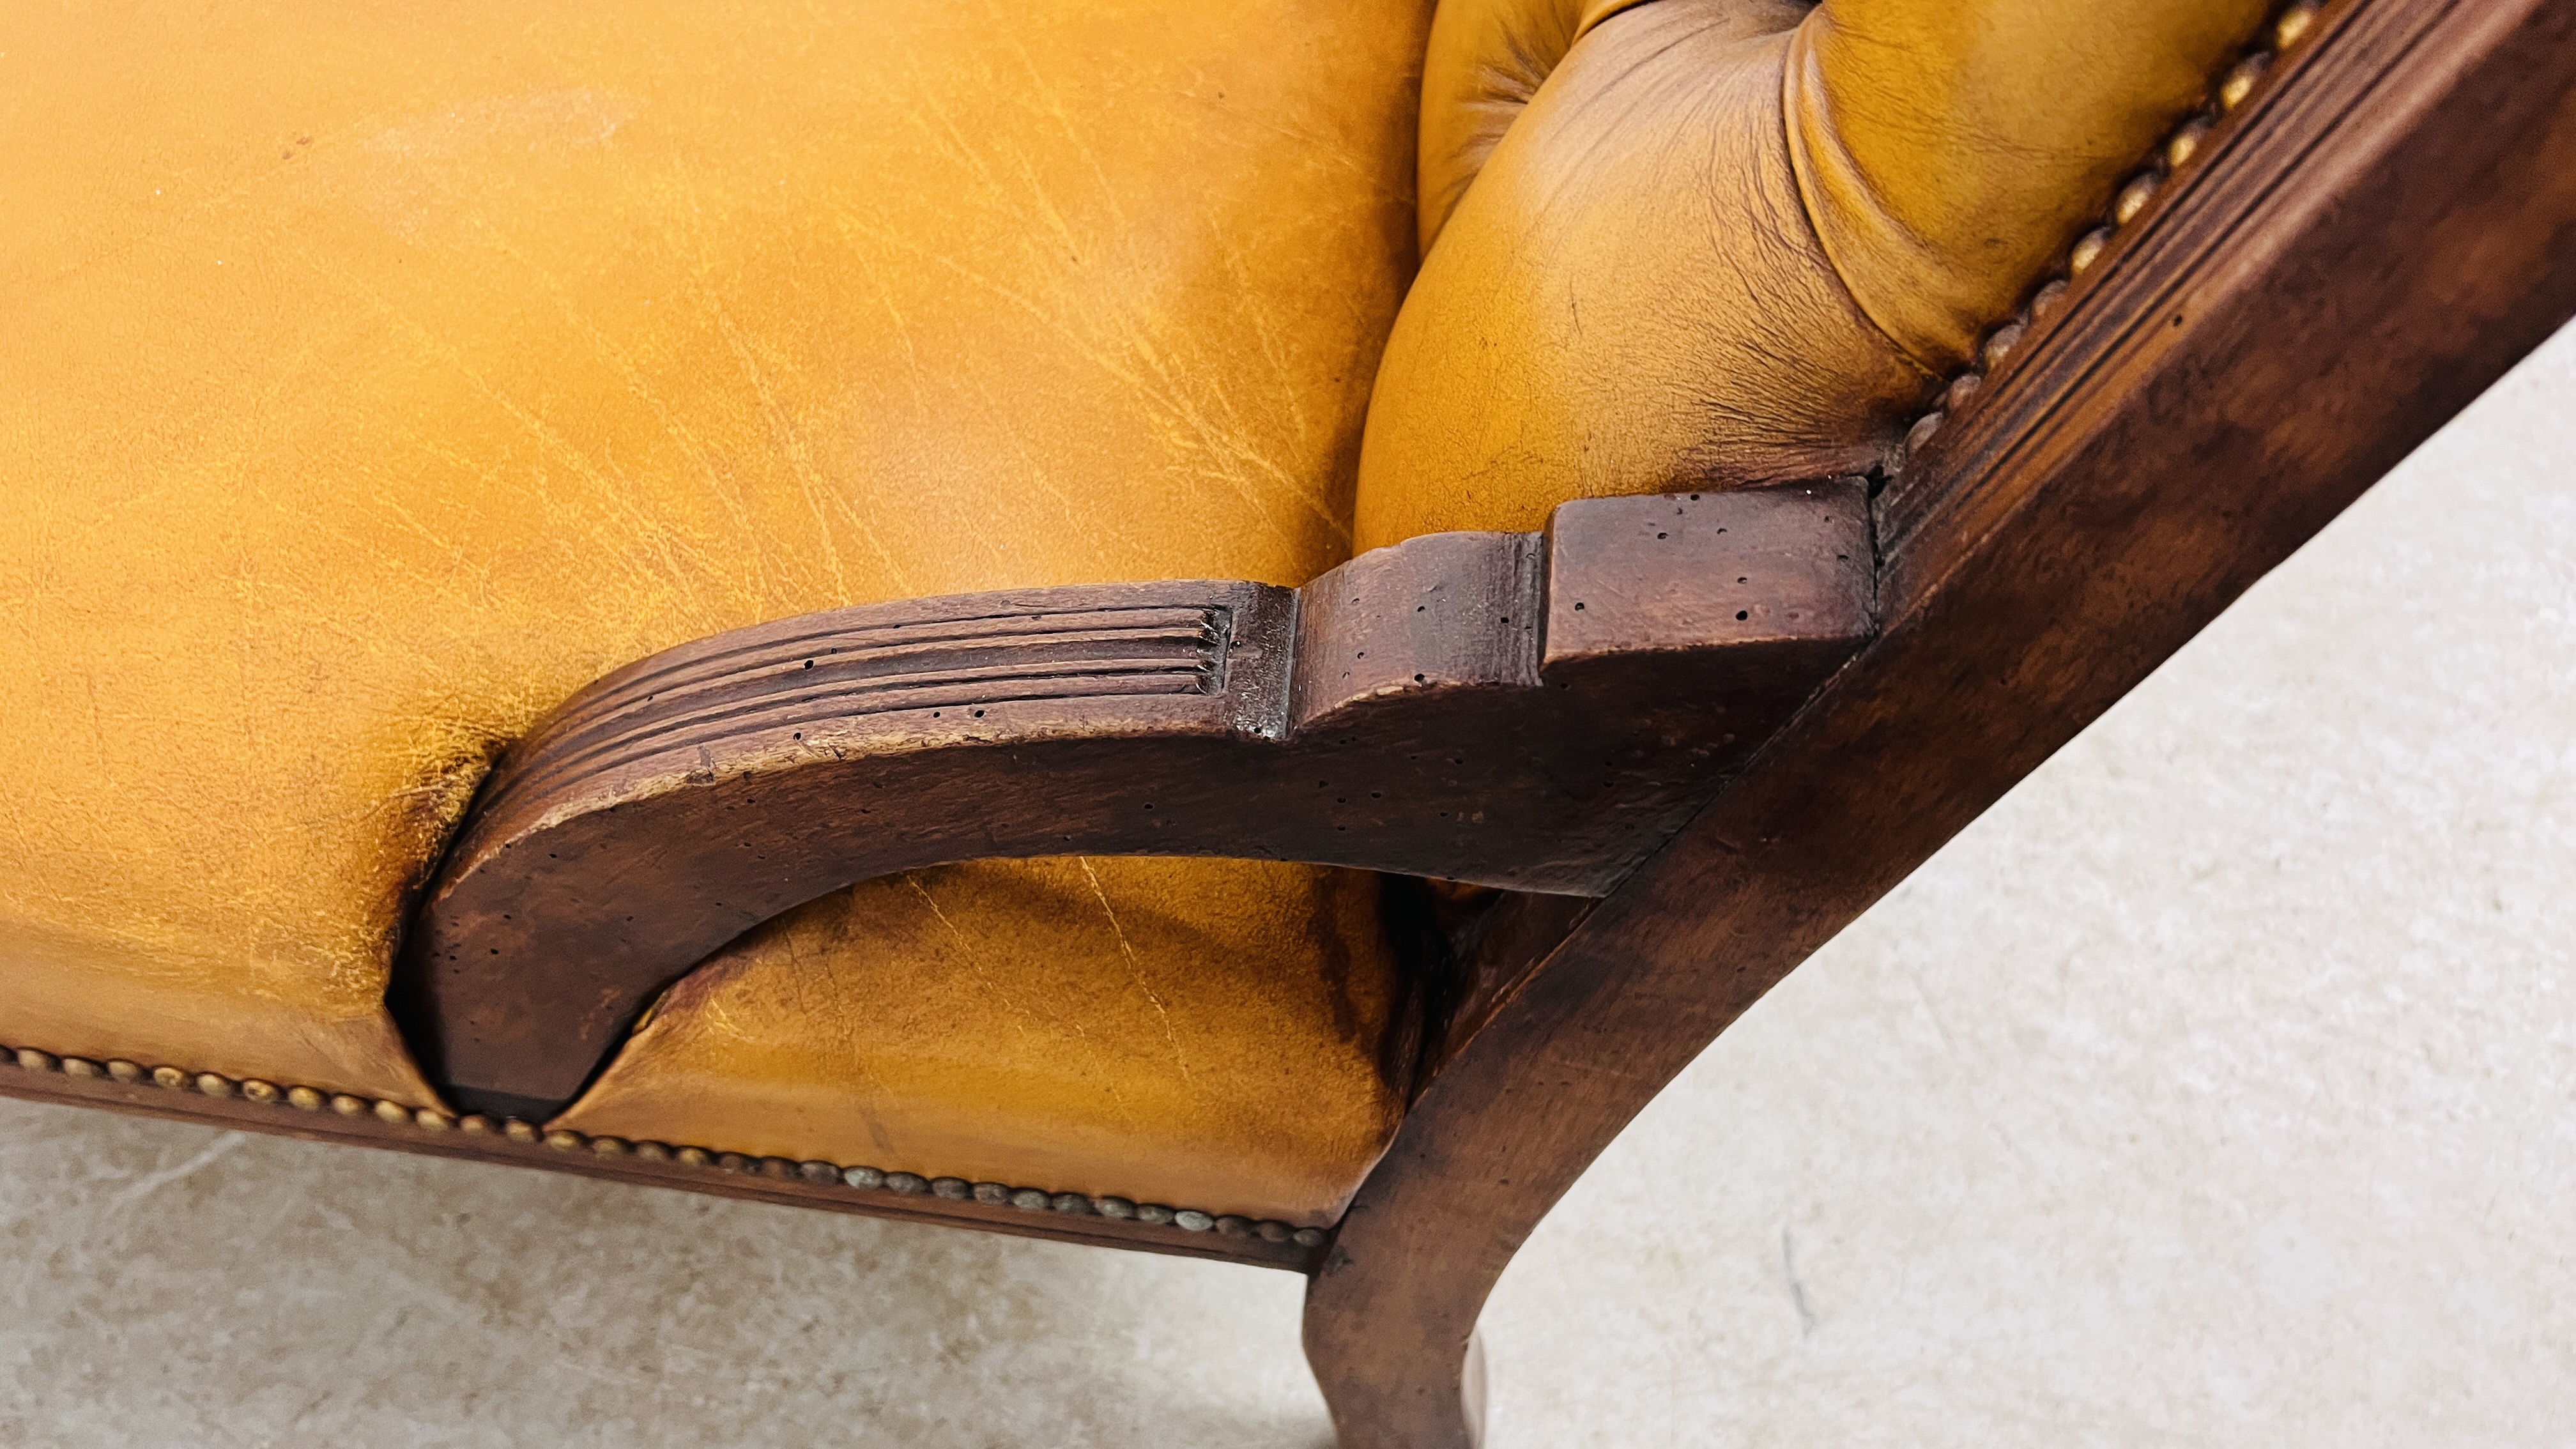 ANTIQUE EDWARDIAN MAHOGANY LOW CHAIR UPHOLSTERED IN TAN LEATHER - BUTTON BACK. - Image 12 of 12